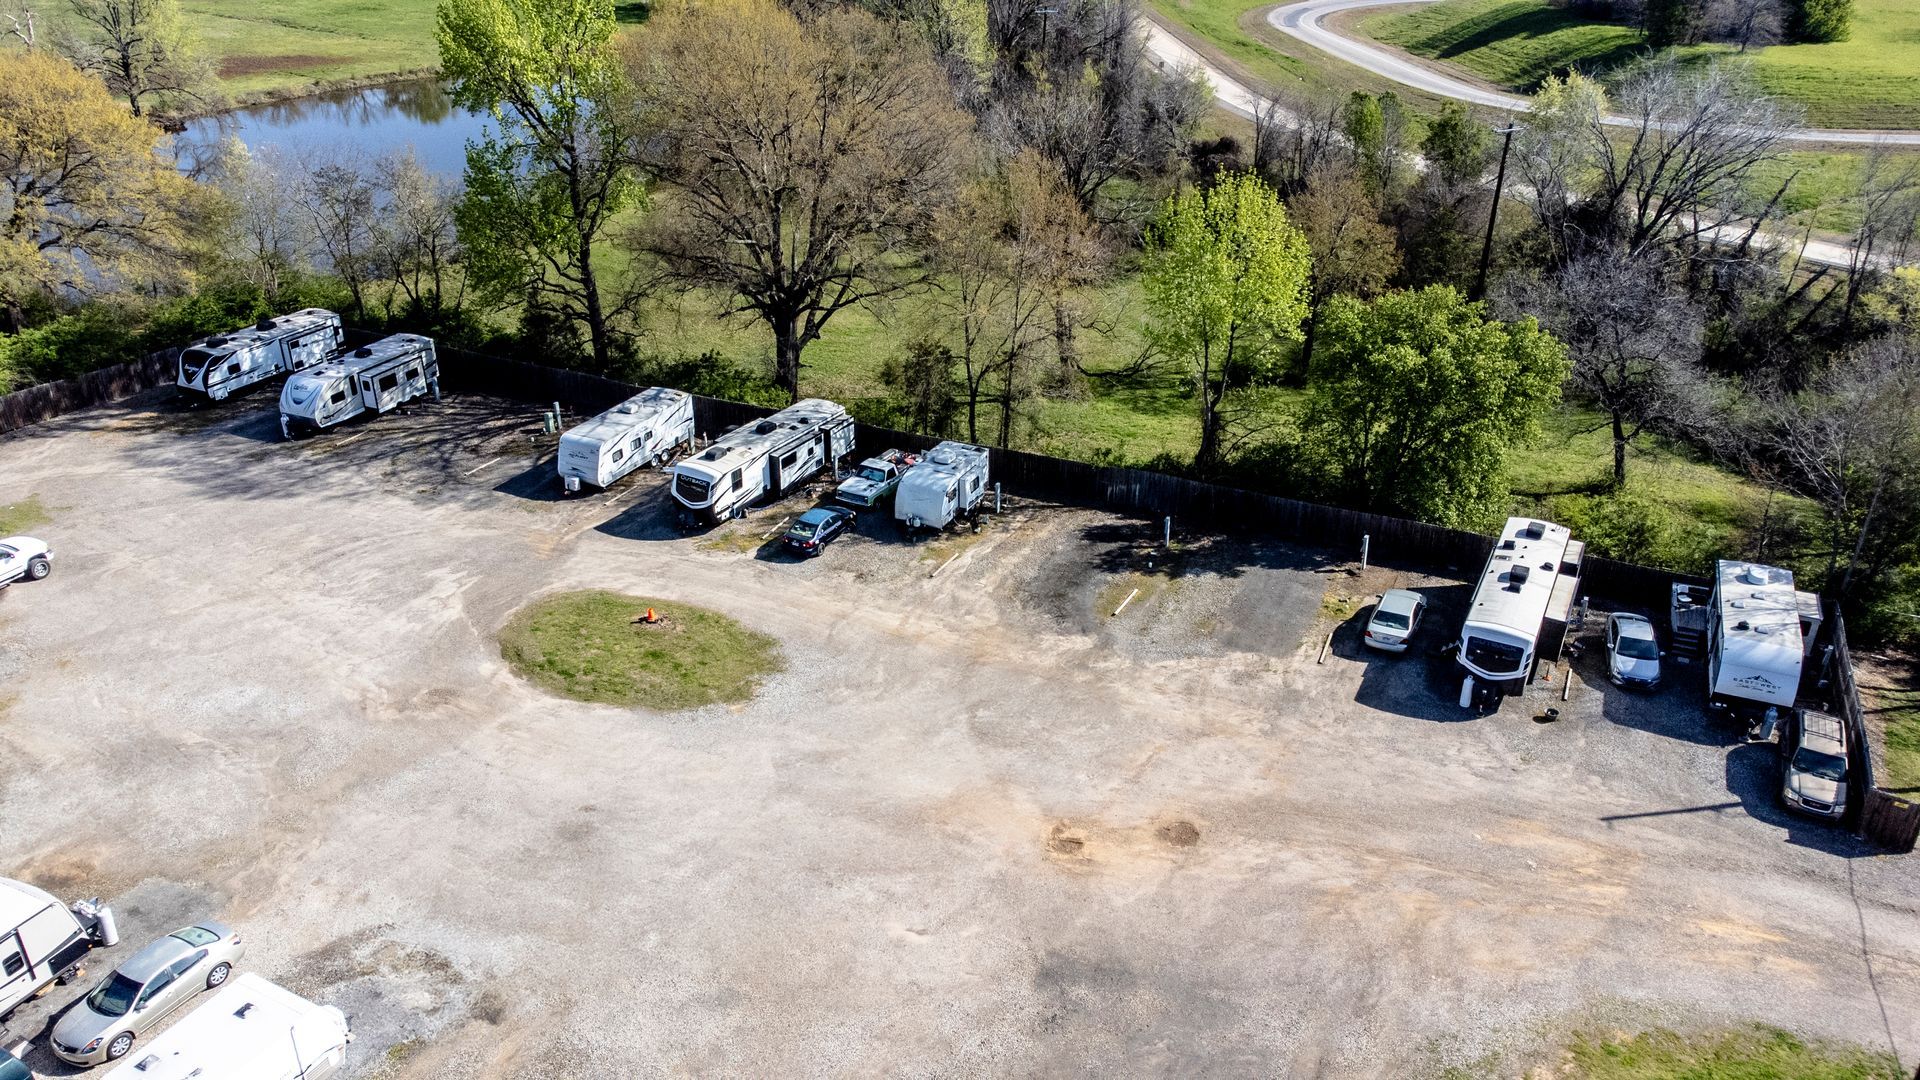 An aerial view of a row of rvs parked in a parking lot.